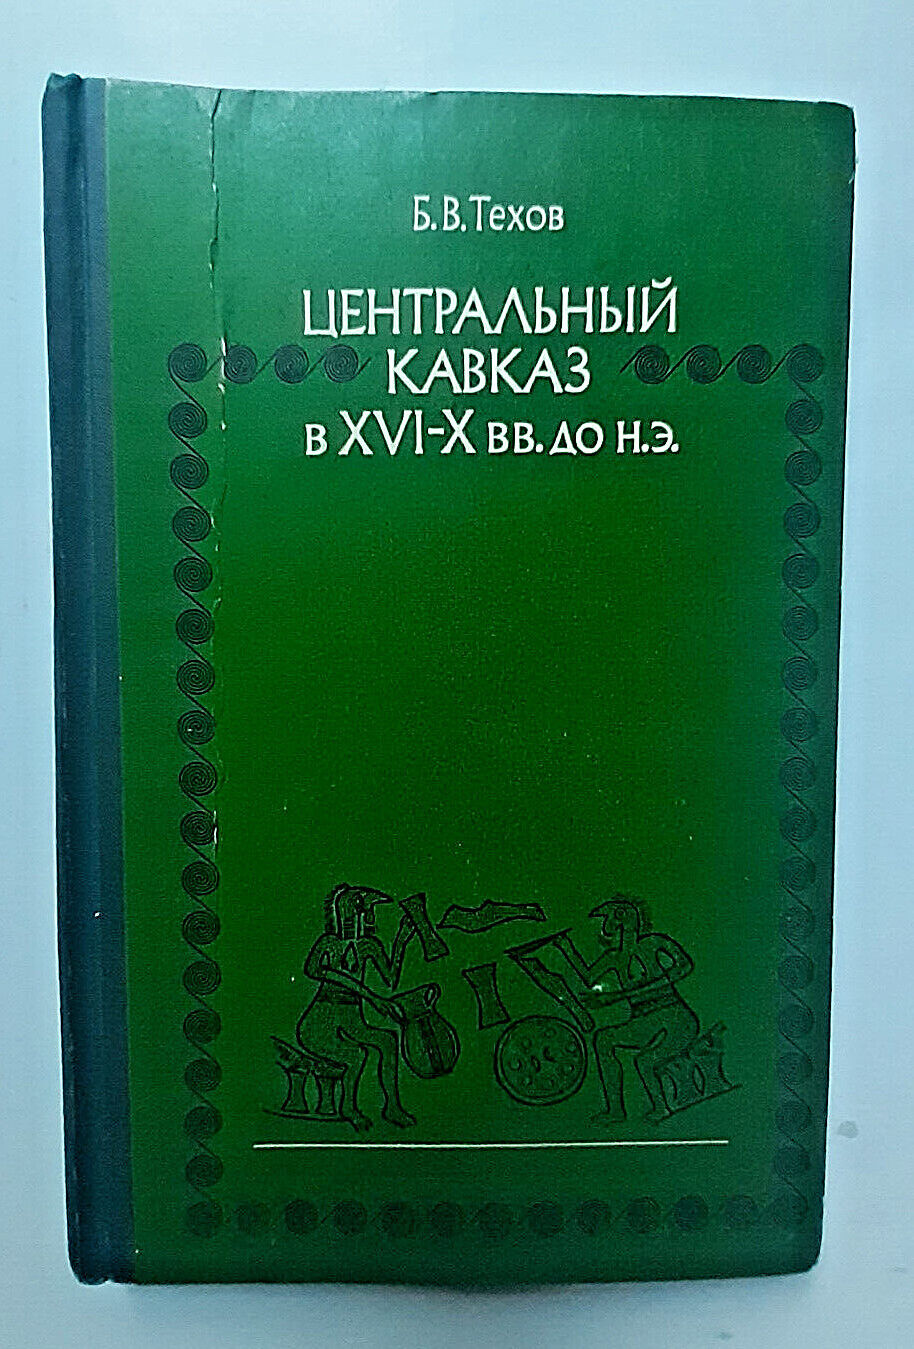 1977 Central Caucasus in the XVI-X centuries BC Russian archeology book 3150 pcs